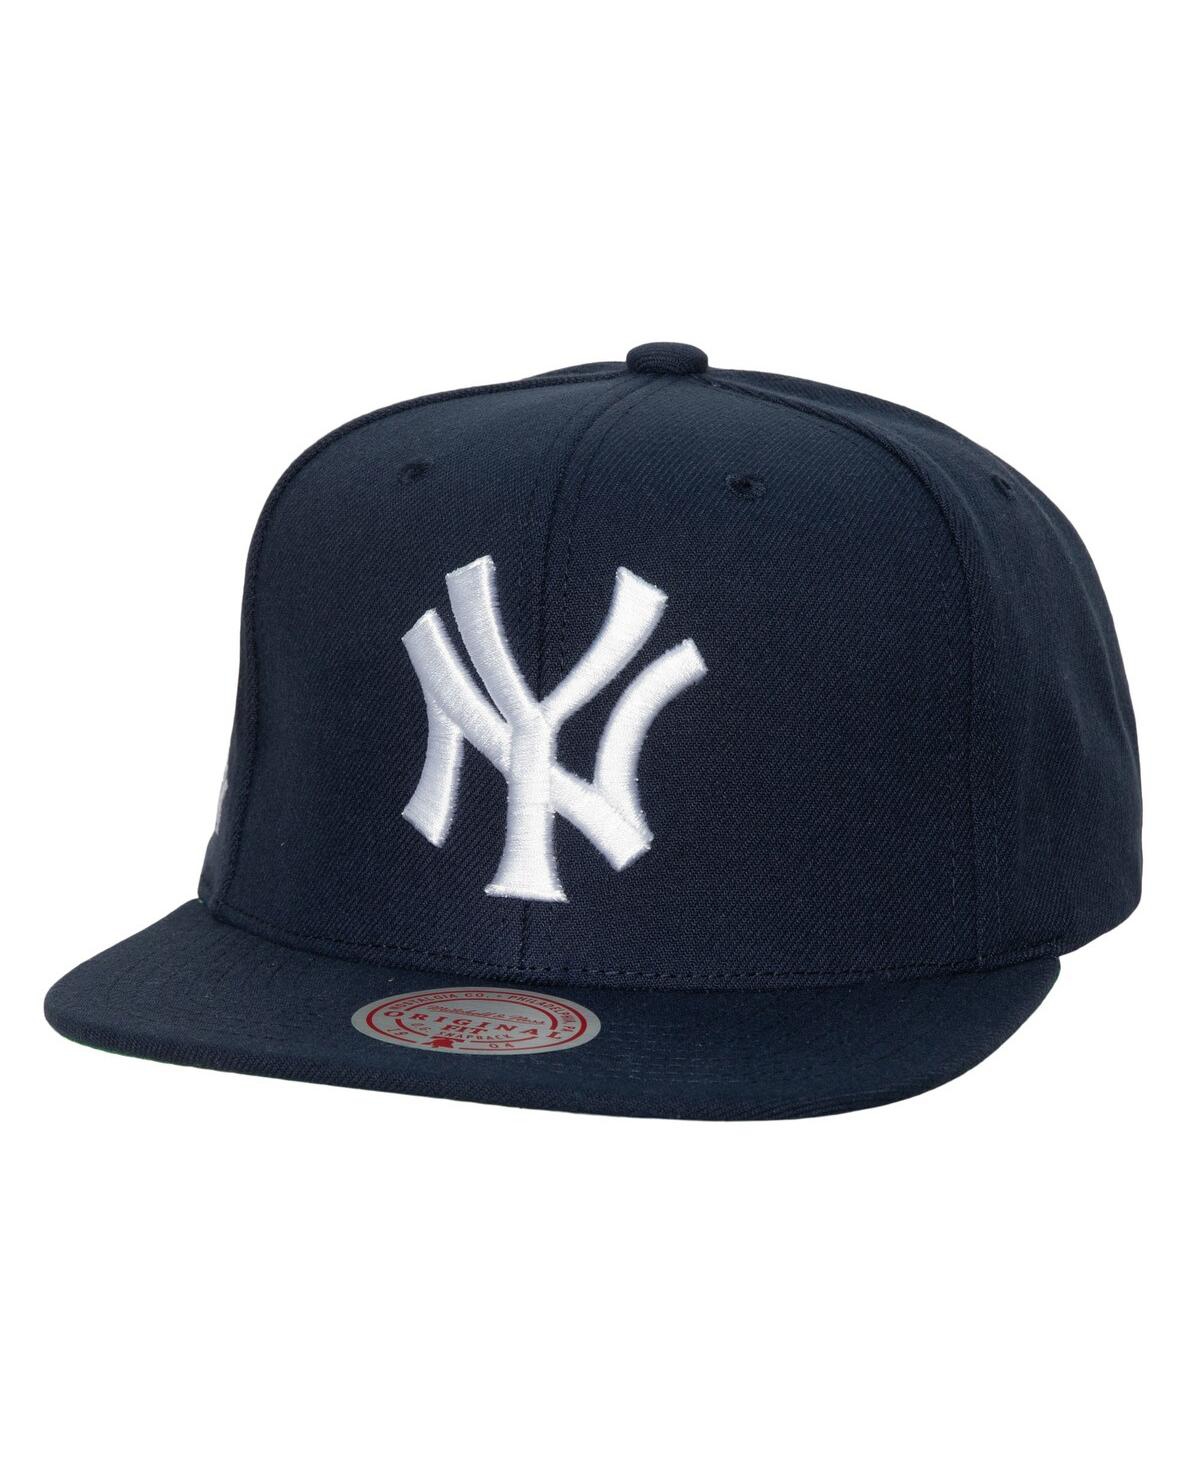 Mitchell & Ness Men's  Navy New York Yankees Cooperstown Collection Evergreen Snapback Hat